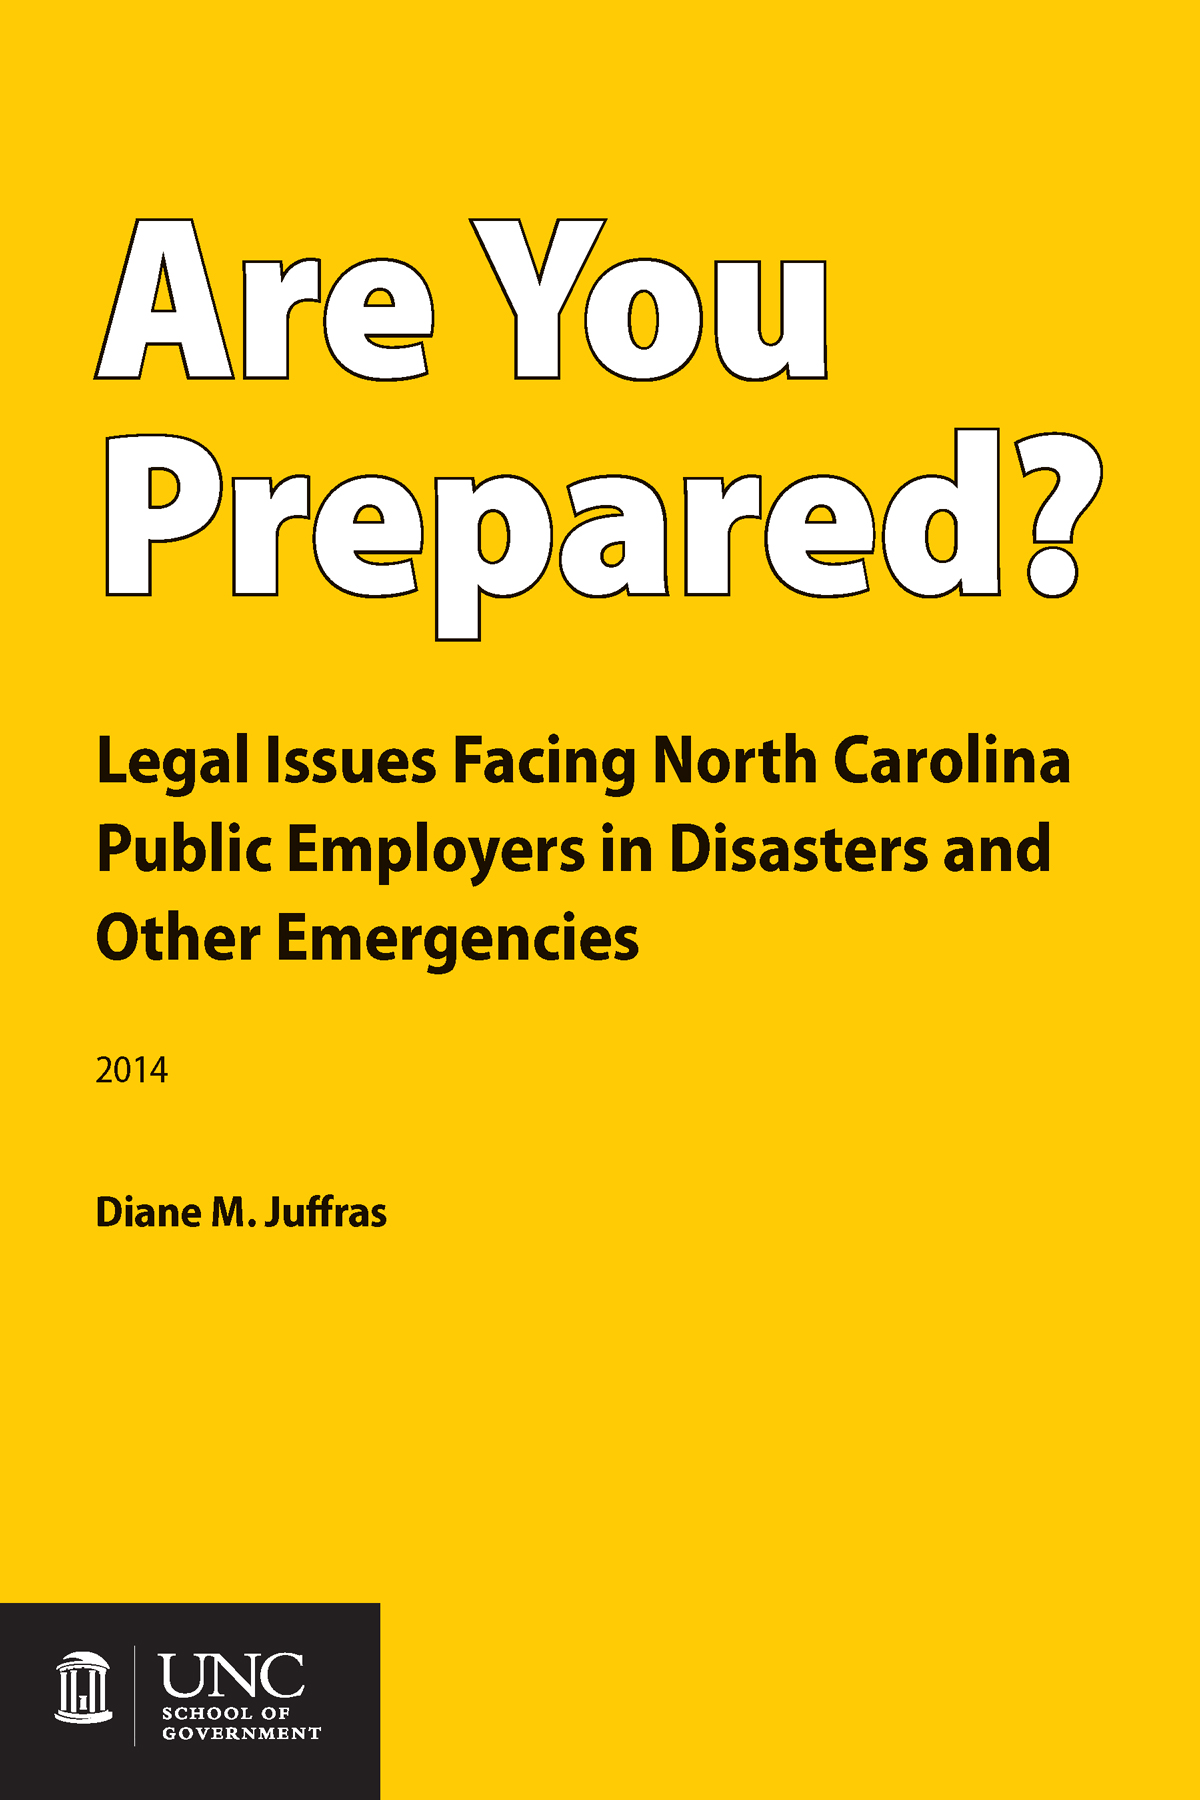 Cover image for Are You Prepared? Legal Issues Facing North Carolina Public Employers in Disasters and Other Emergencies